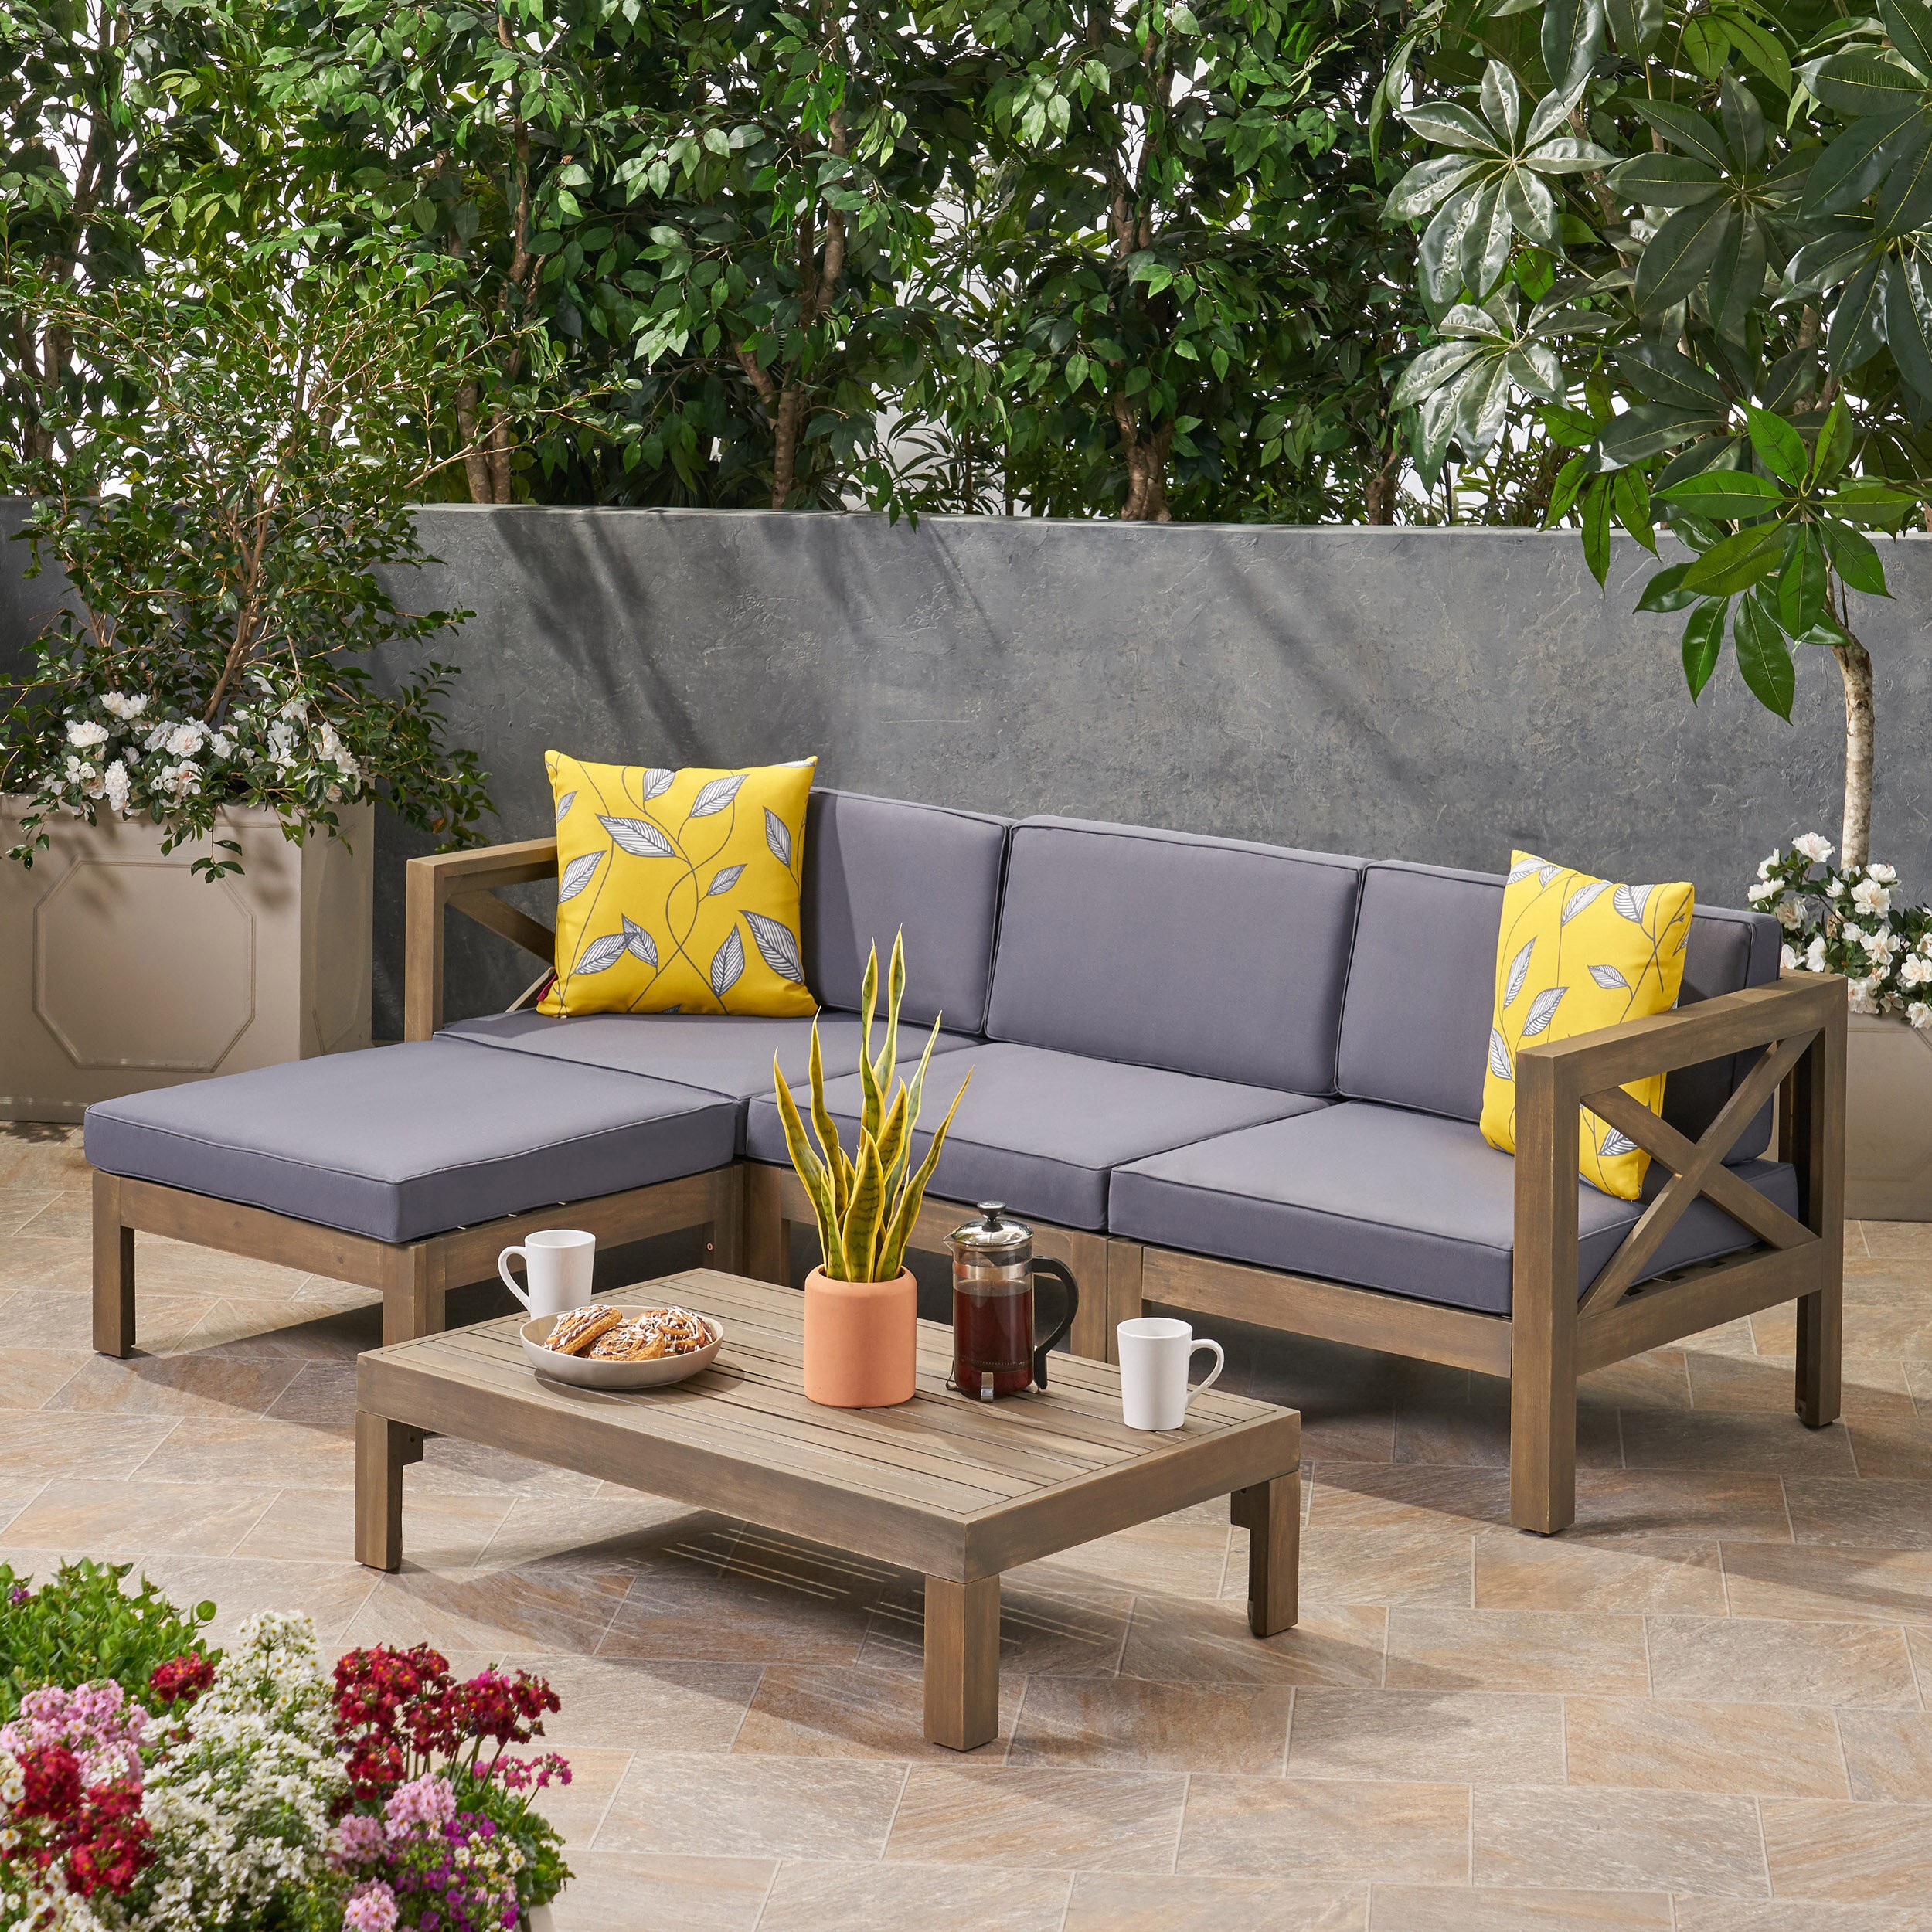 Reina Outdoor 5 Piece Sectional Seating Group with Cushions